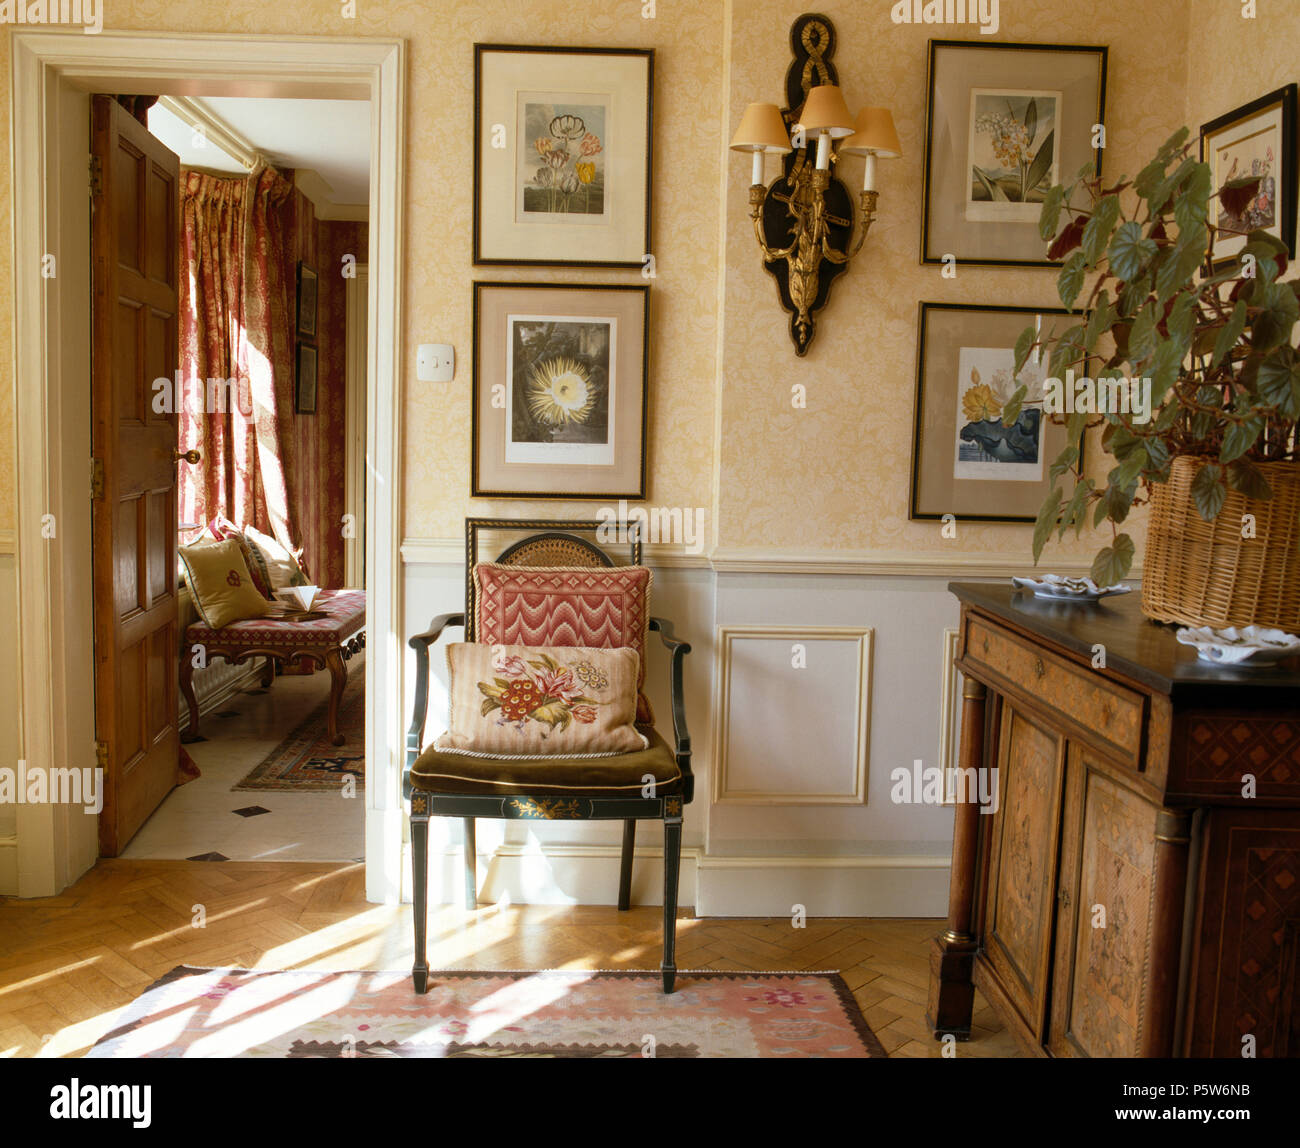 Antique chair and cupboard in cream hall with pictures on wall beside open doorway Stock Photo